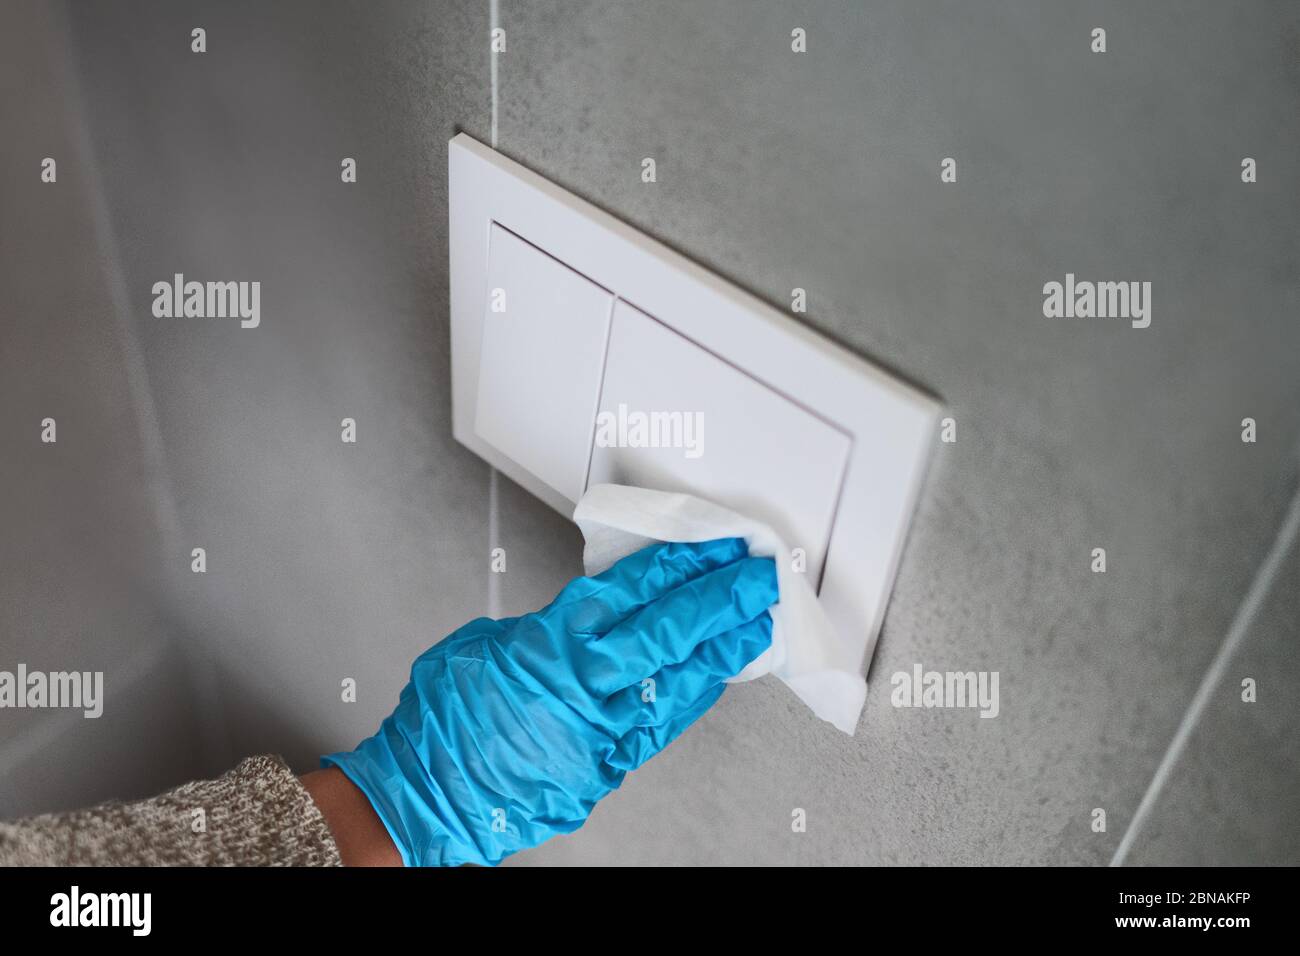 Surface sanitizing wipes of home surfaces, wall button switches wiping paper towel sanitizer with gloves. Stock Photo